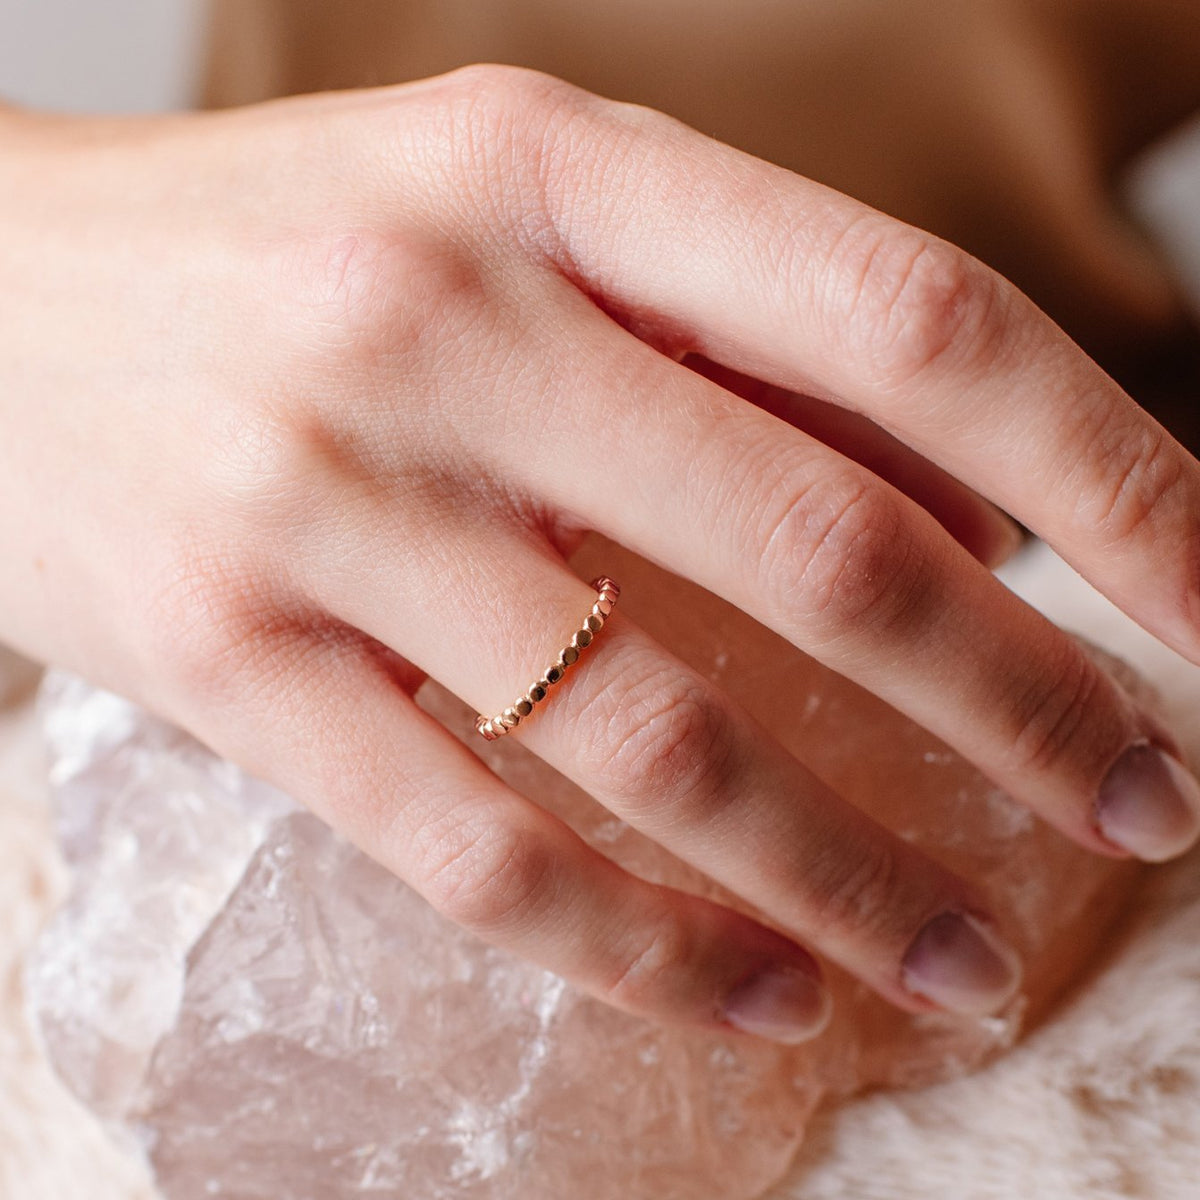 POISE THIN DISK BAND RING - ROSE GOLD - SO PRETTY CARA COTTER